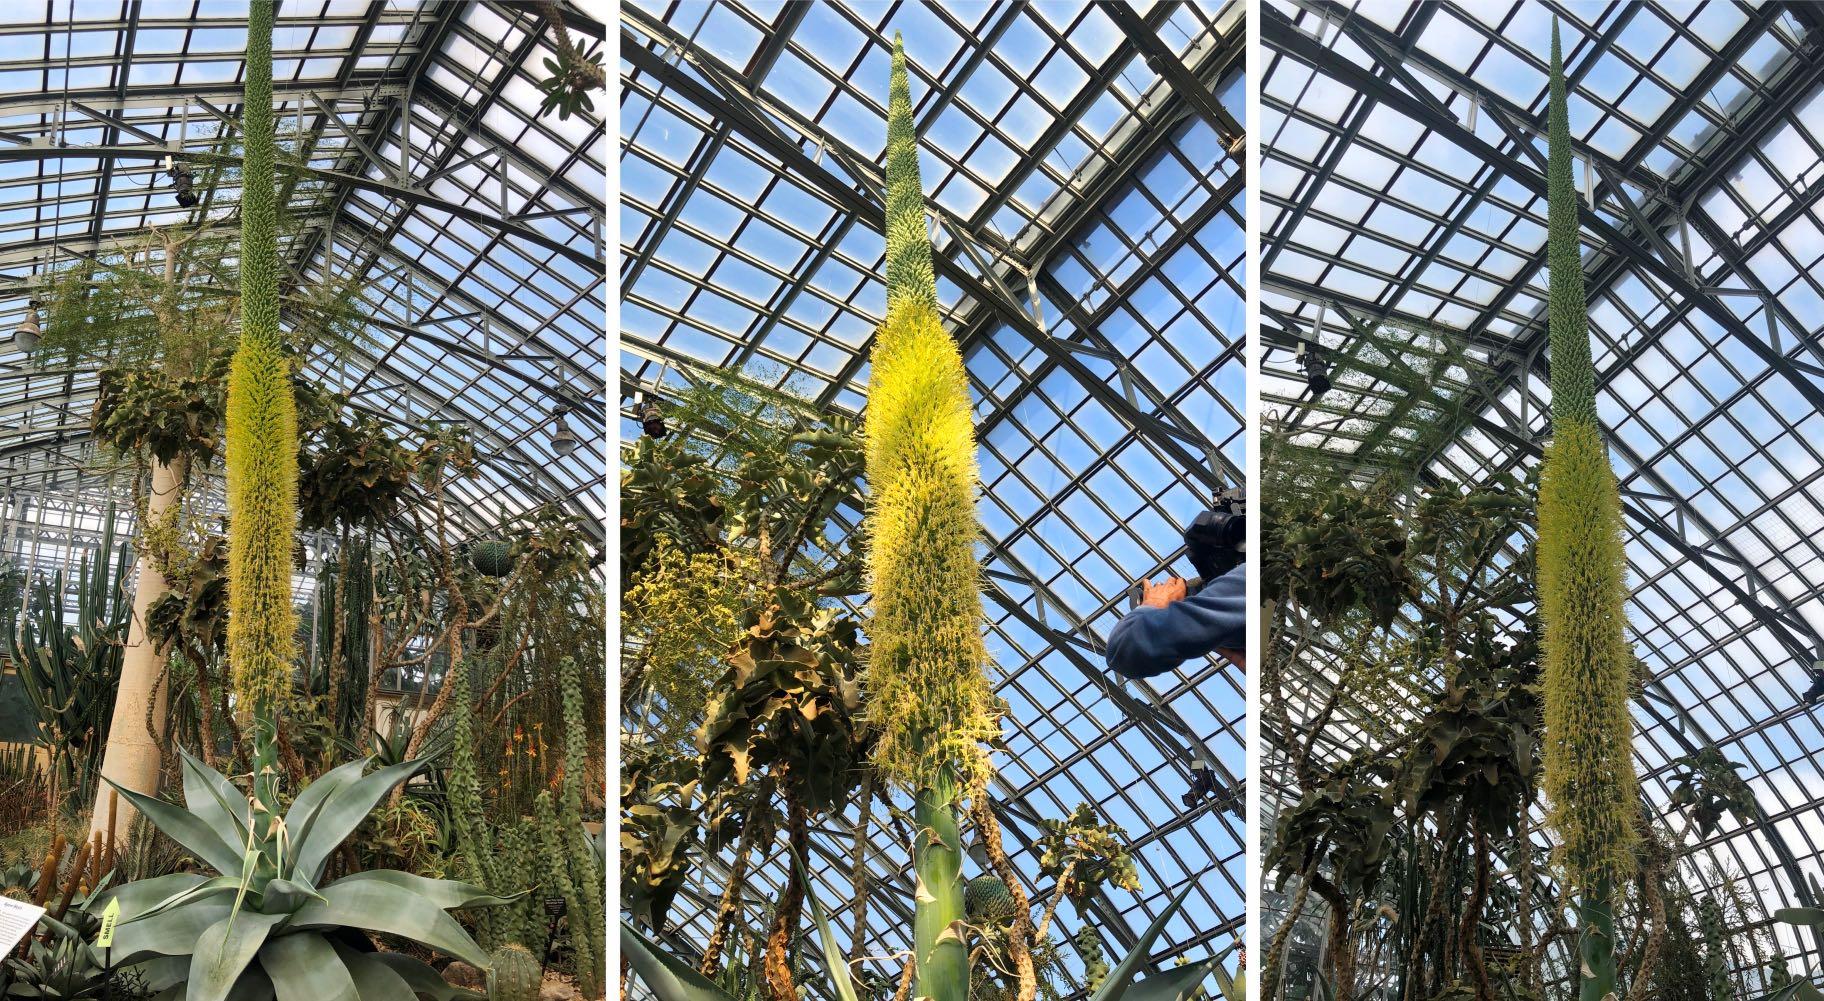 Guien the agave, at Garfield Park Conservatory, Feb. 7, 2022. (Patty Wetli / WTTW News)